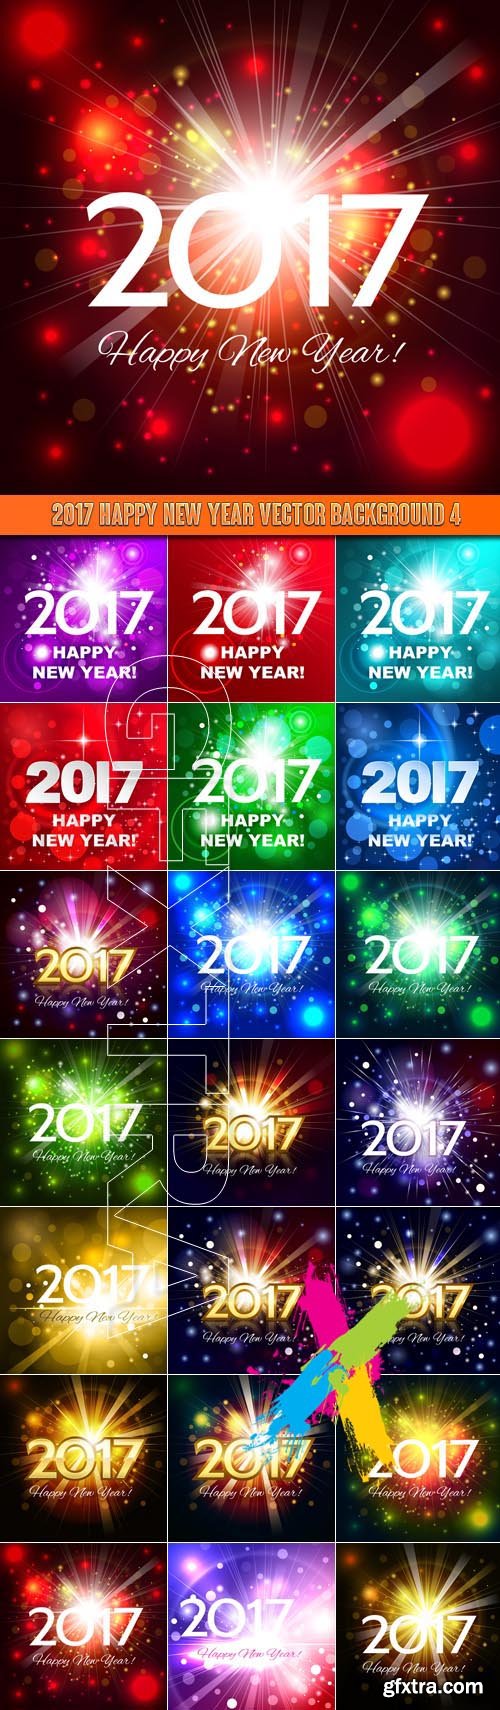 2017 Happy New Year vector background 4